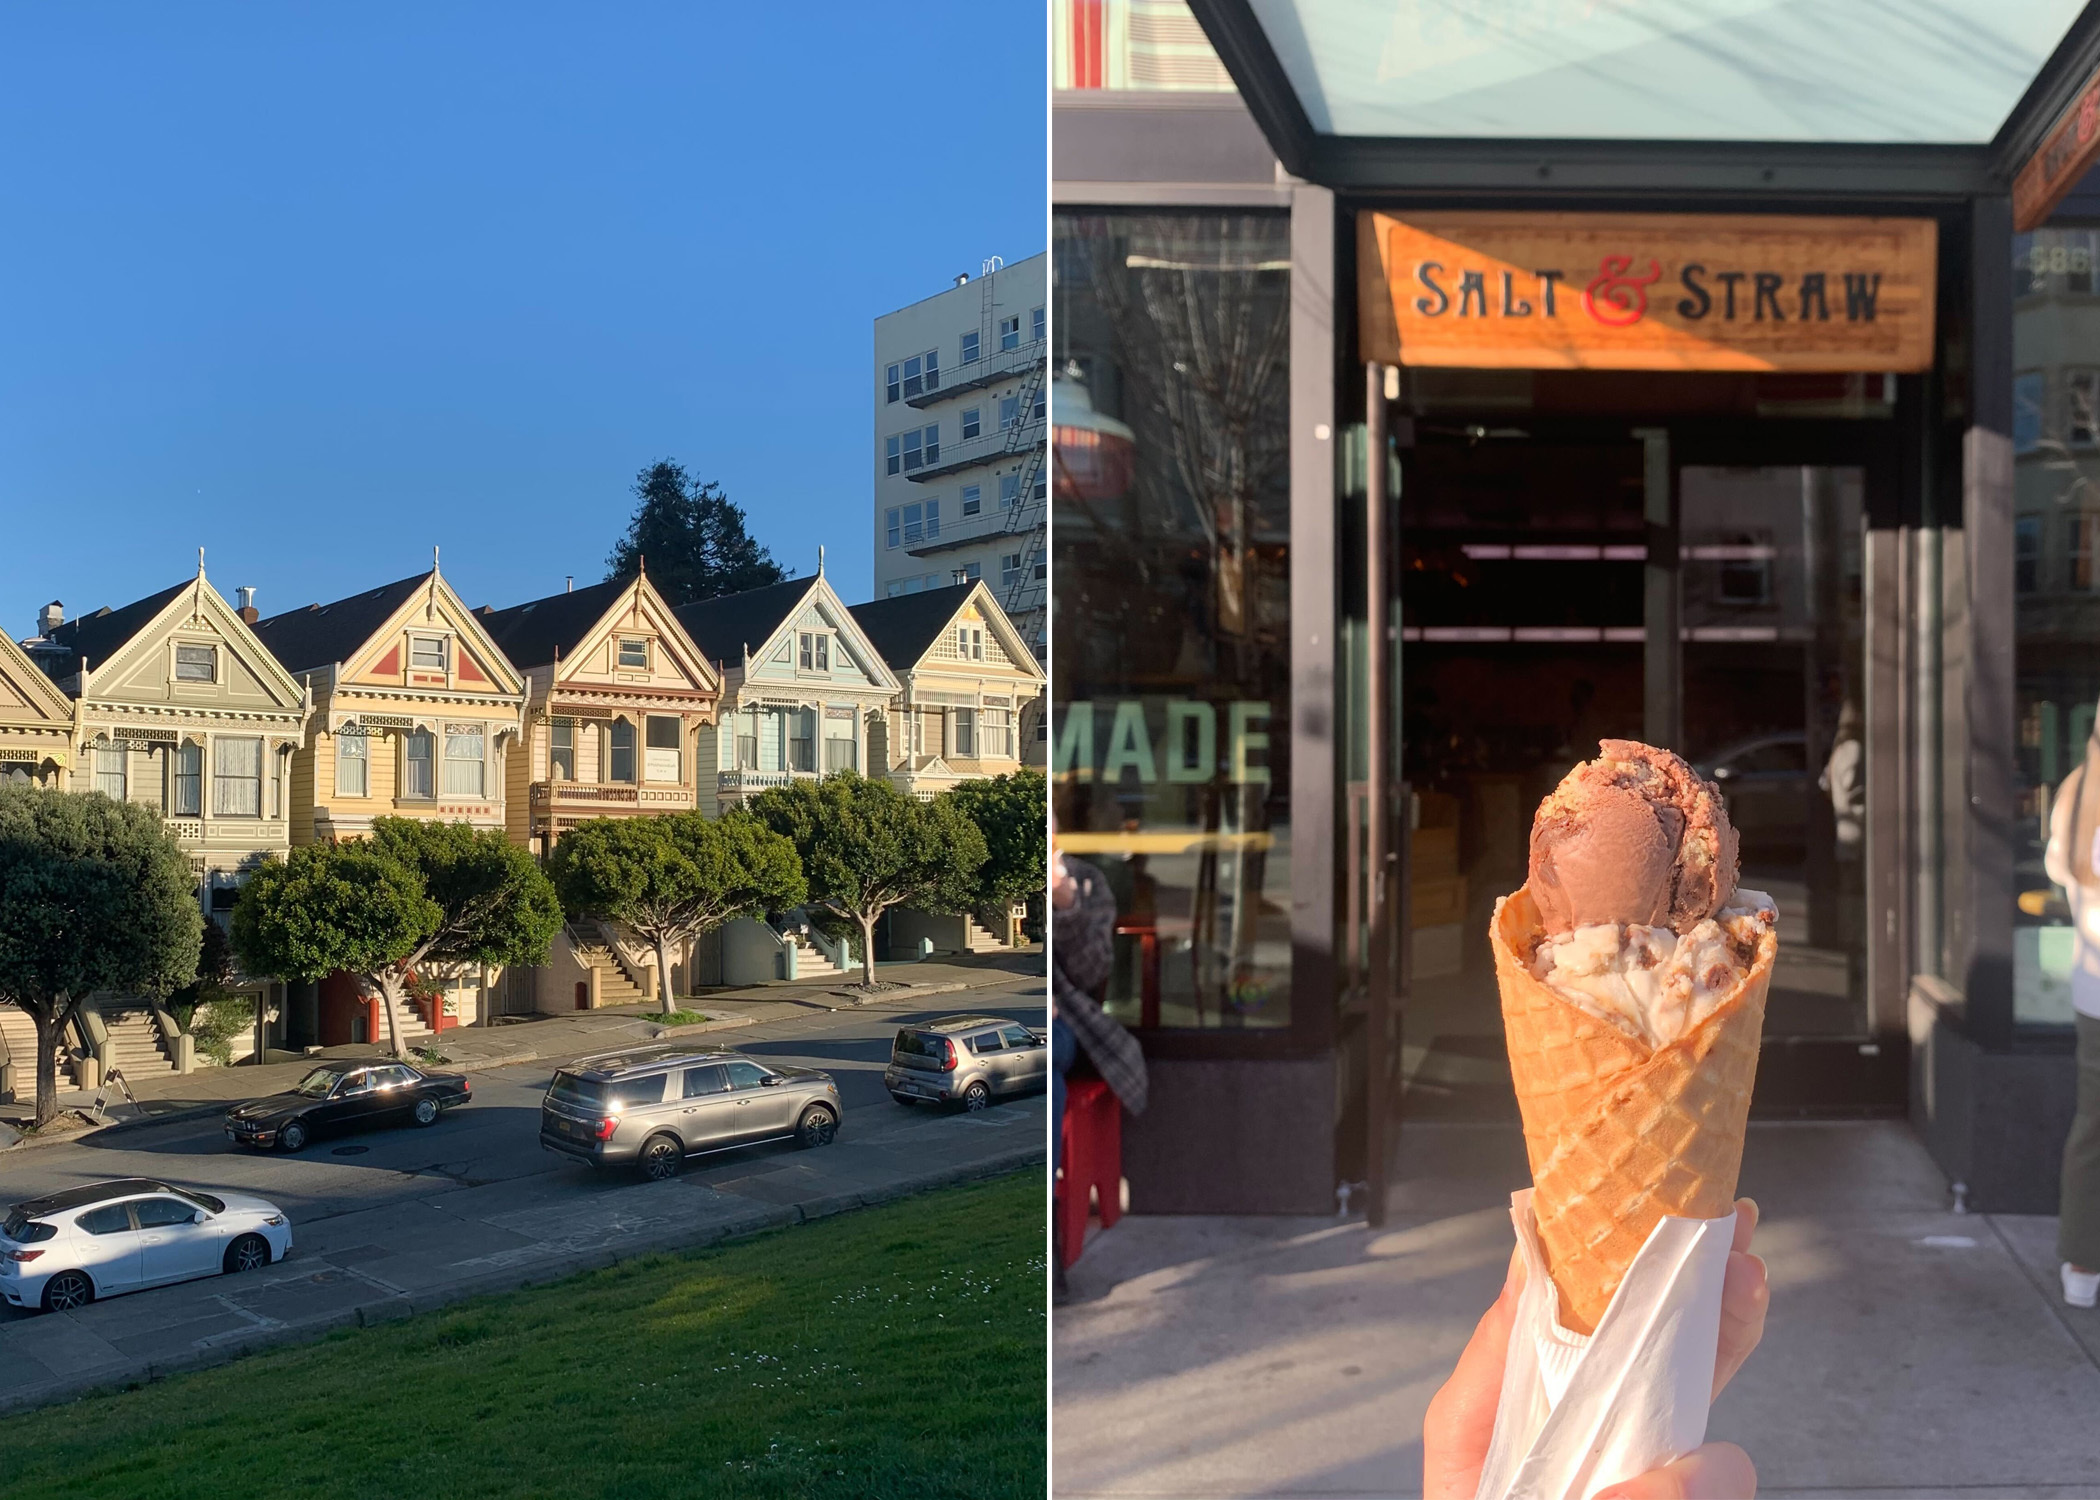 On the left are a row of old houses beautifully painted. On the right, an ice cream cone in a waffle cone is in the foreground with a shop and orange awning behind.